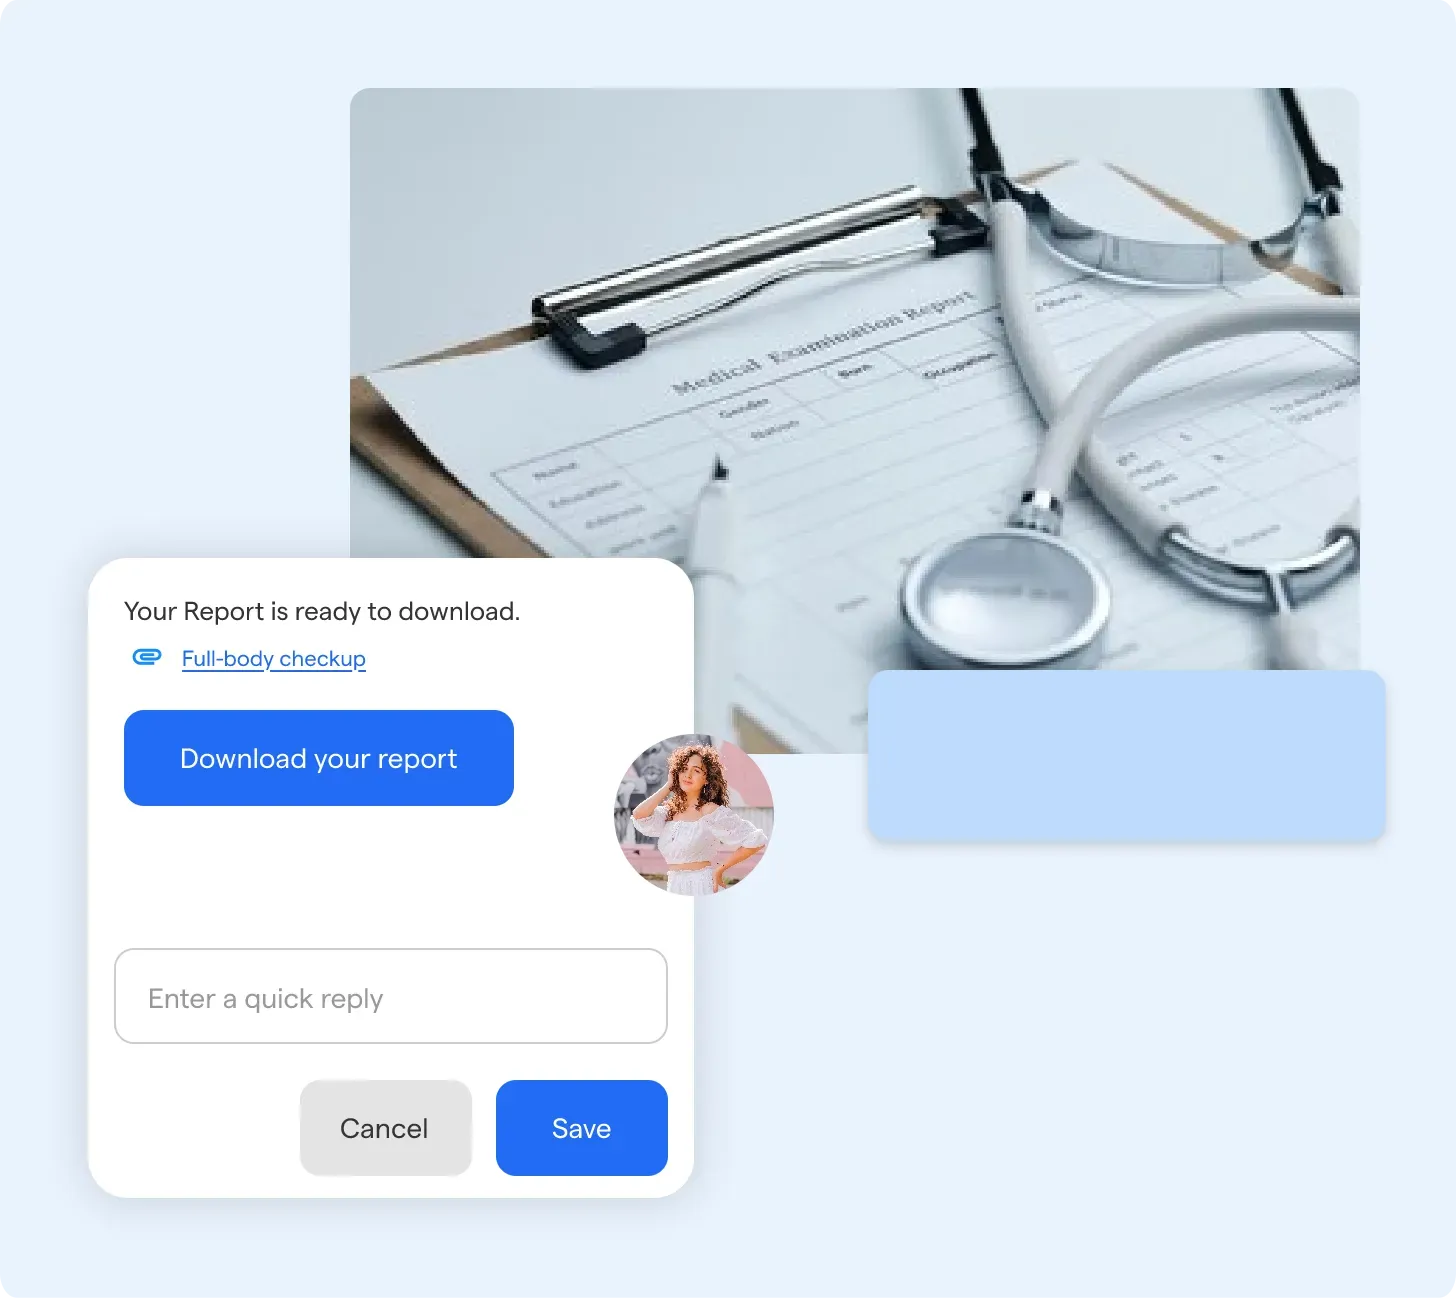 Benefits of healthcare chatbots for patients